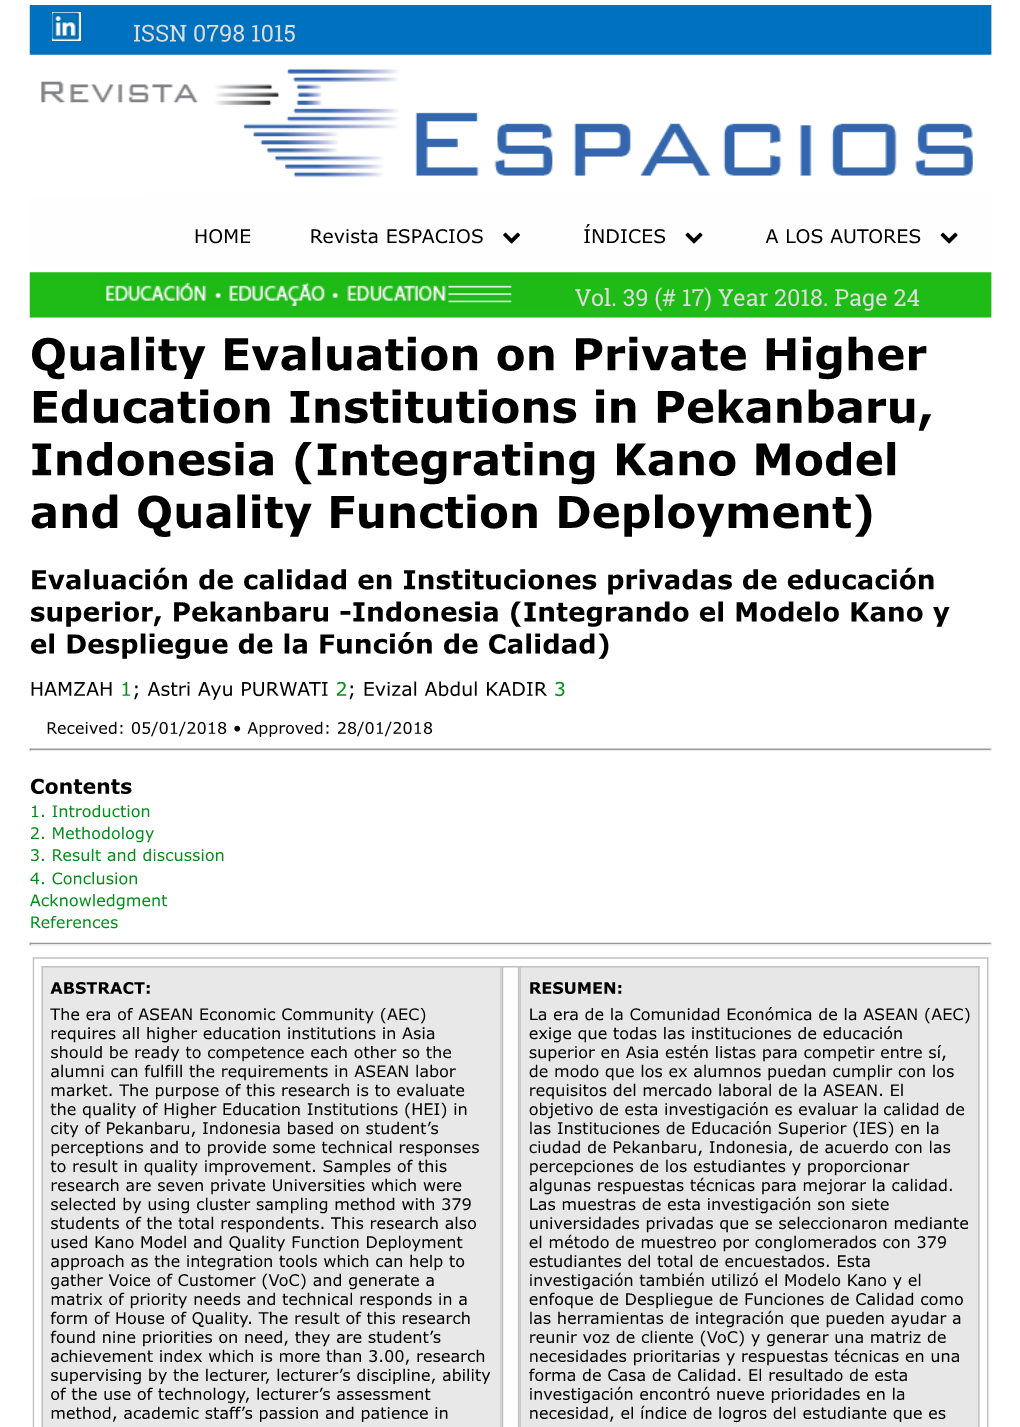 Quality Evaluation on Private Higher Education Institutions in Pekanbaru, Indonesia (Integrating Kano Model and Quality Function Deployment)